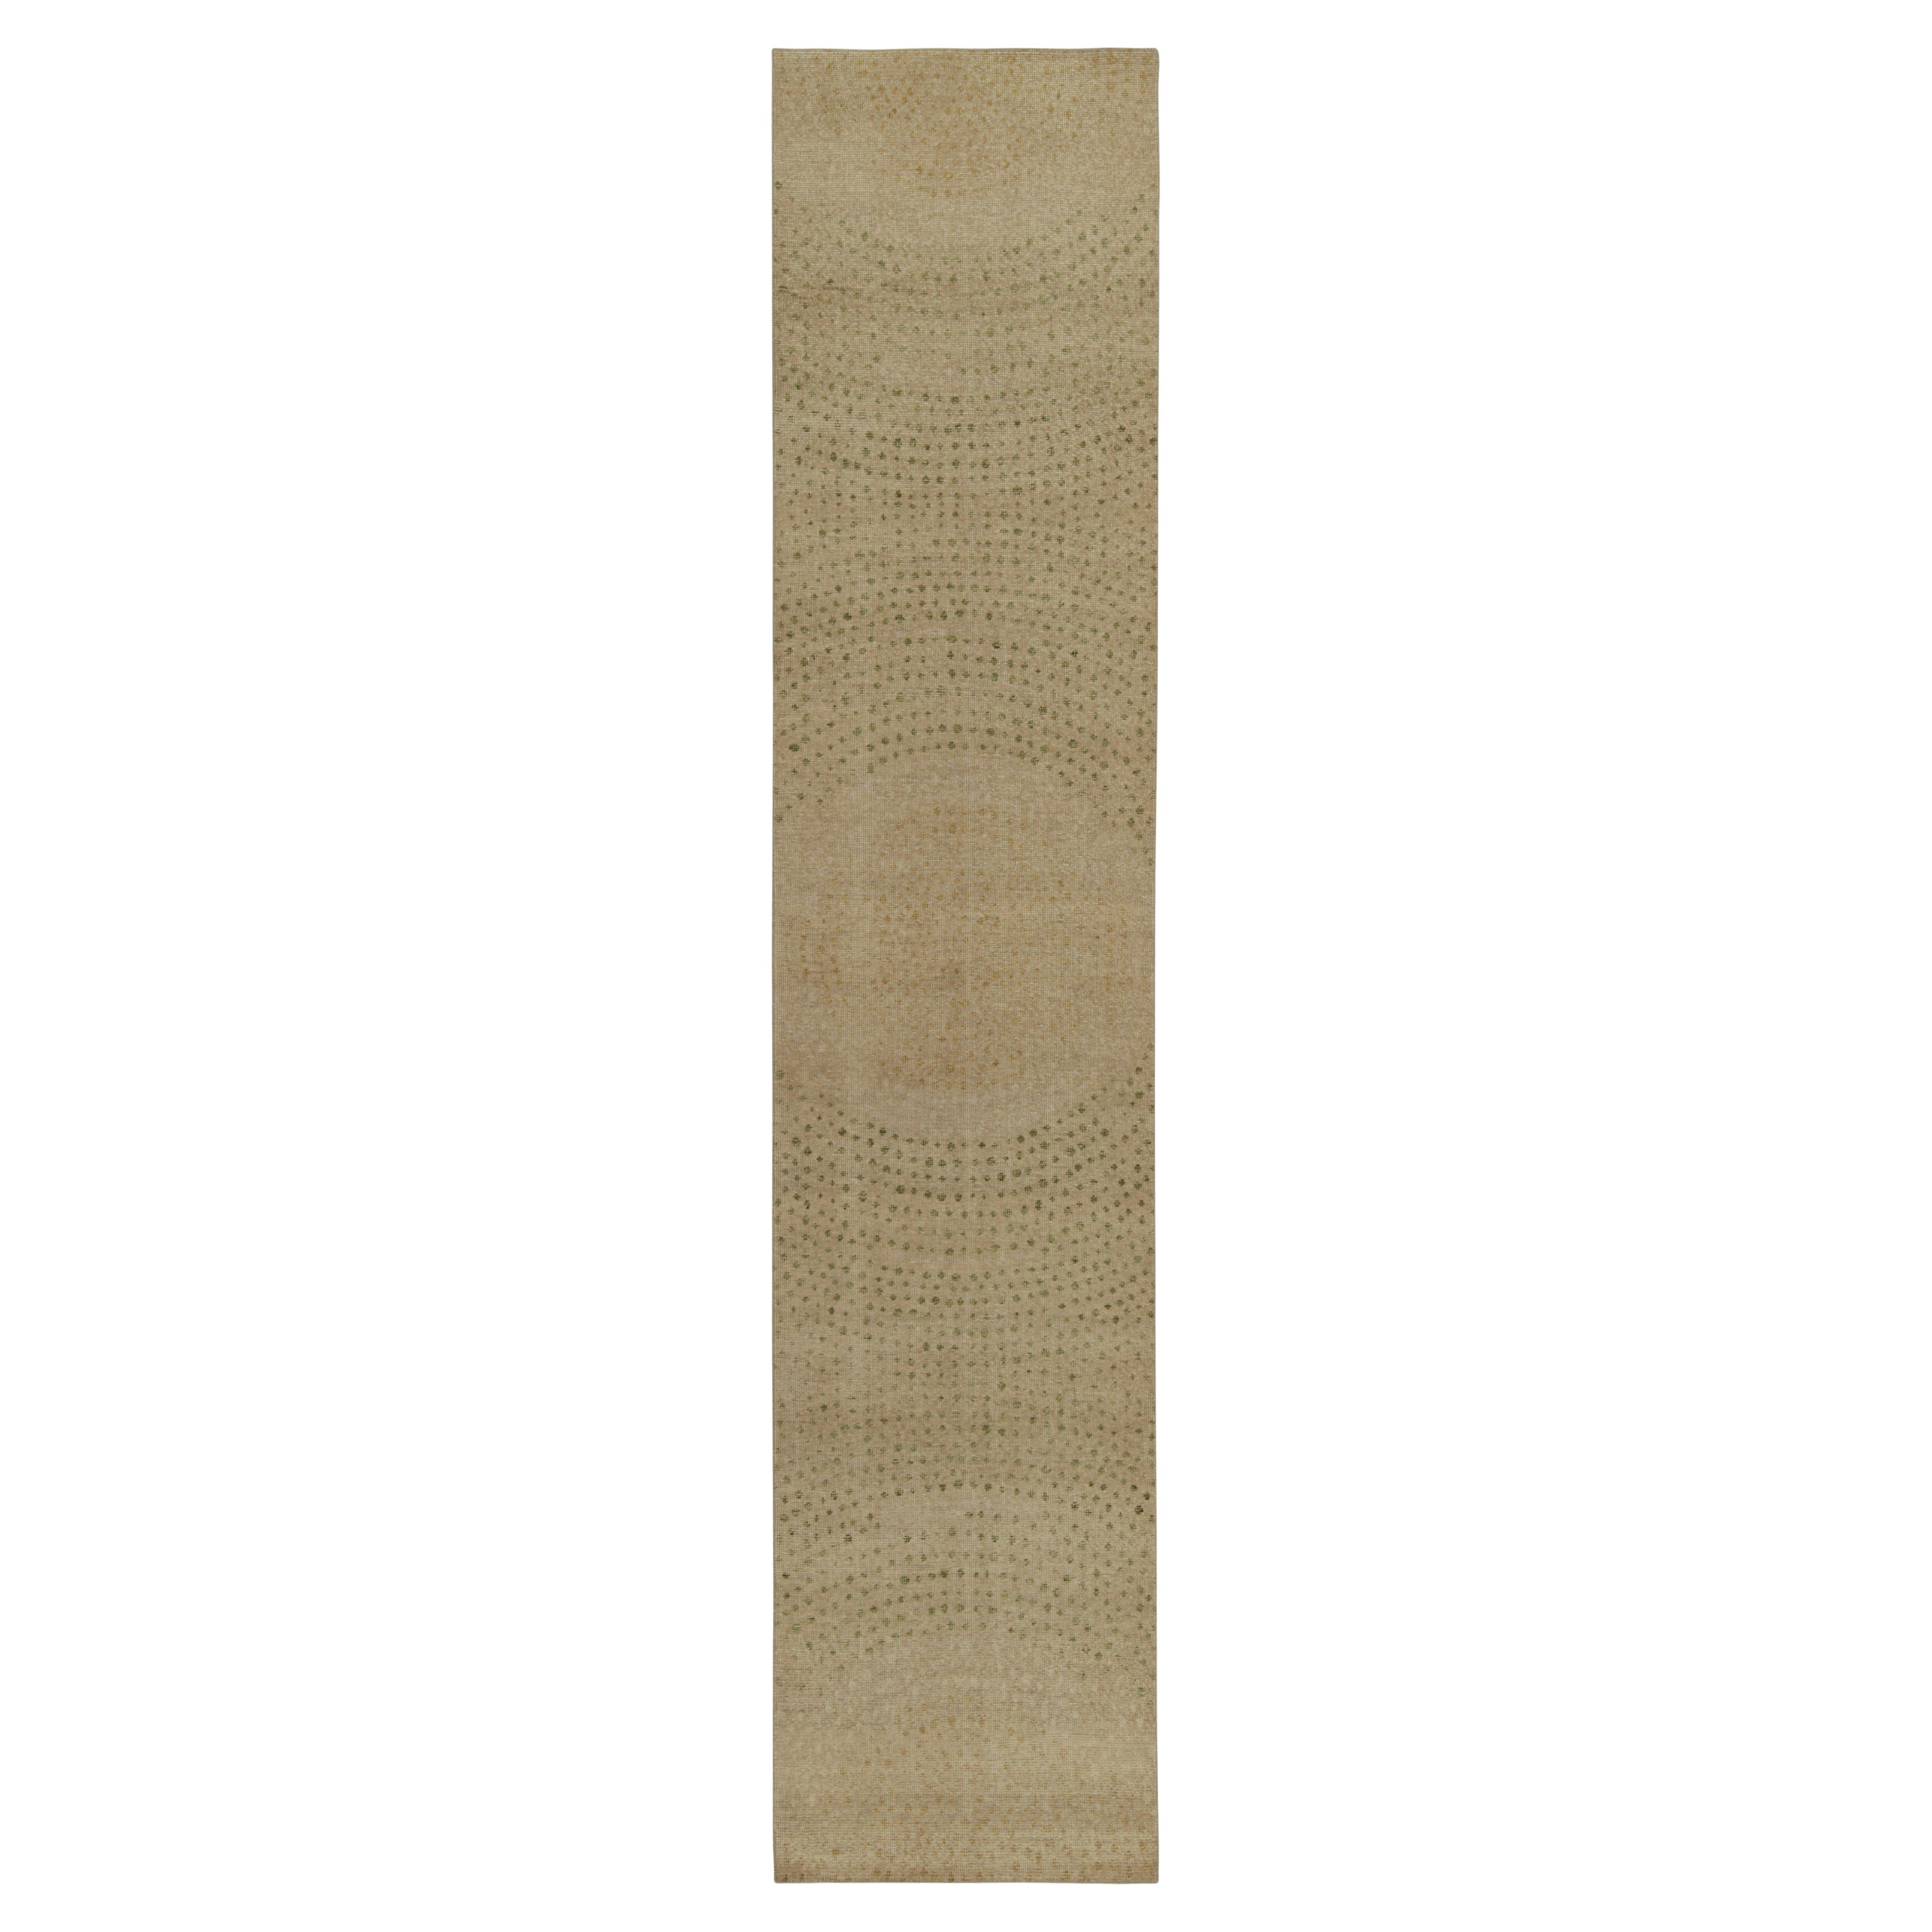 Rug & Kilim’s Distressed Style Runner in Beige & Green Abstract Dots Pattern